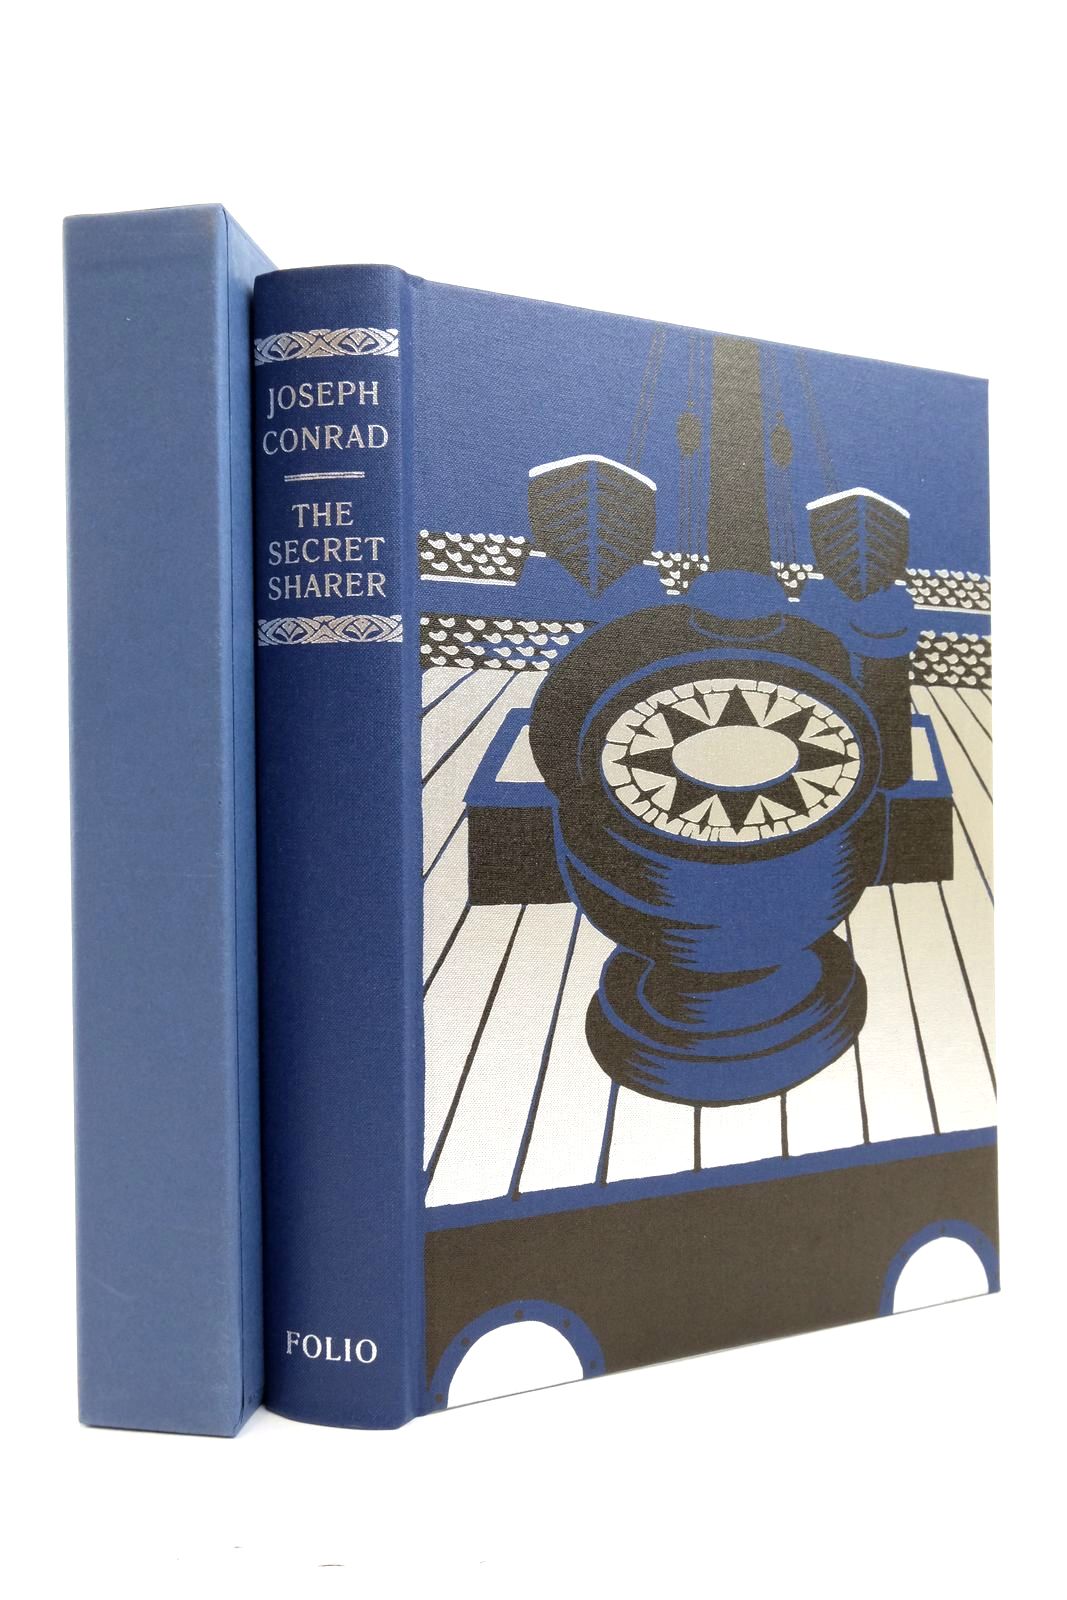 Photo of THE SECRET SHARER AND OTHER STORIES written by Conrad, Joseph Harding, Jeremy illustrated by Mosley, Francis published by Folio Society (STOCK CODE: 2137213)  for sale by Stella & Rose's Books